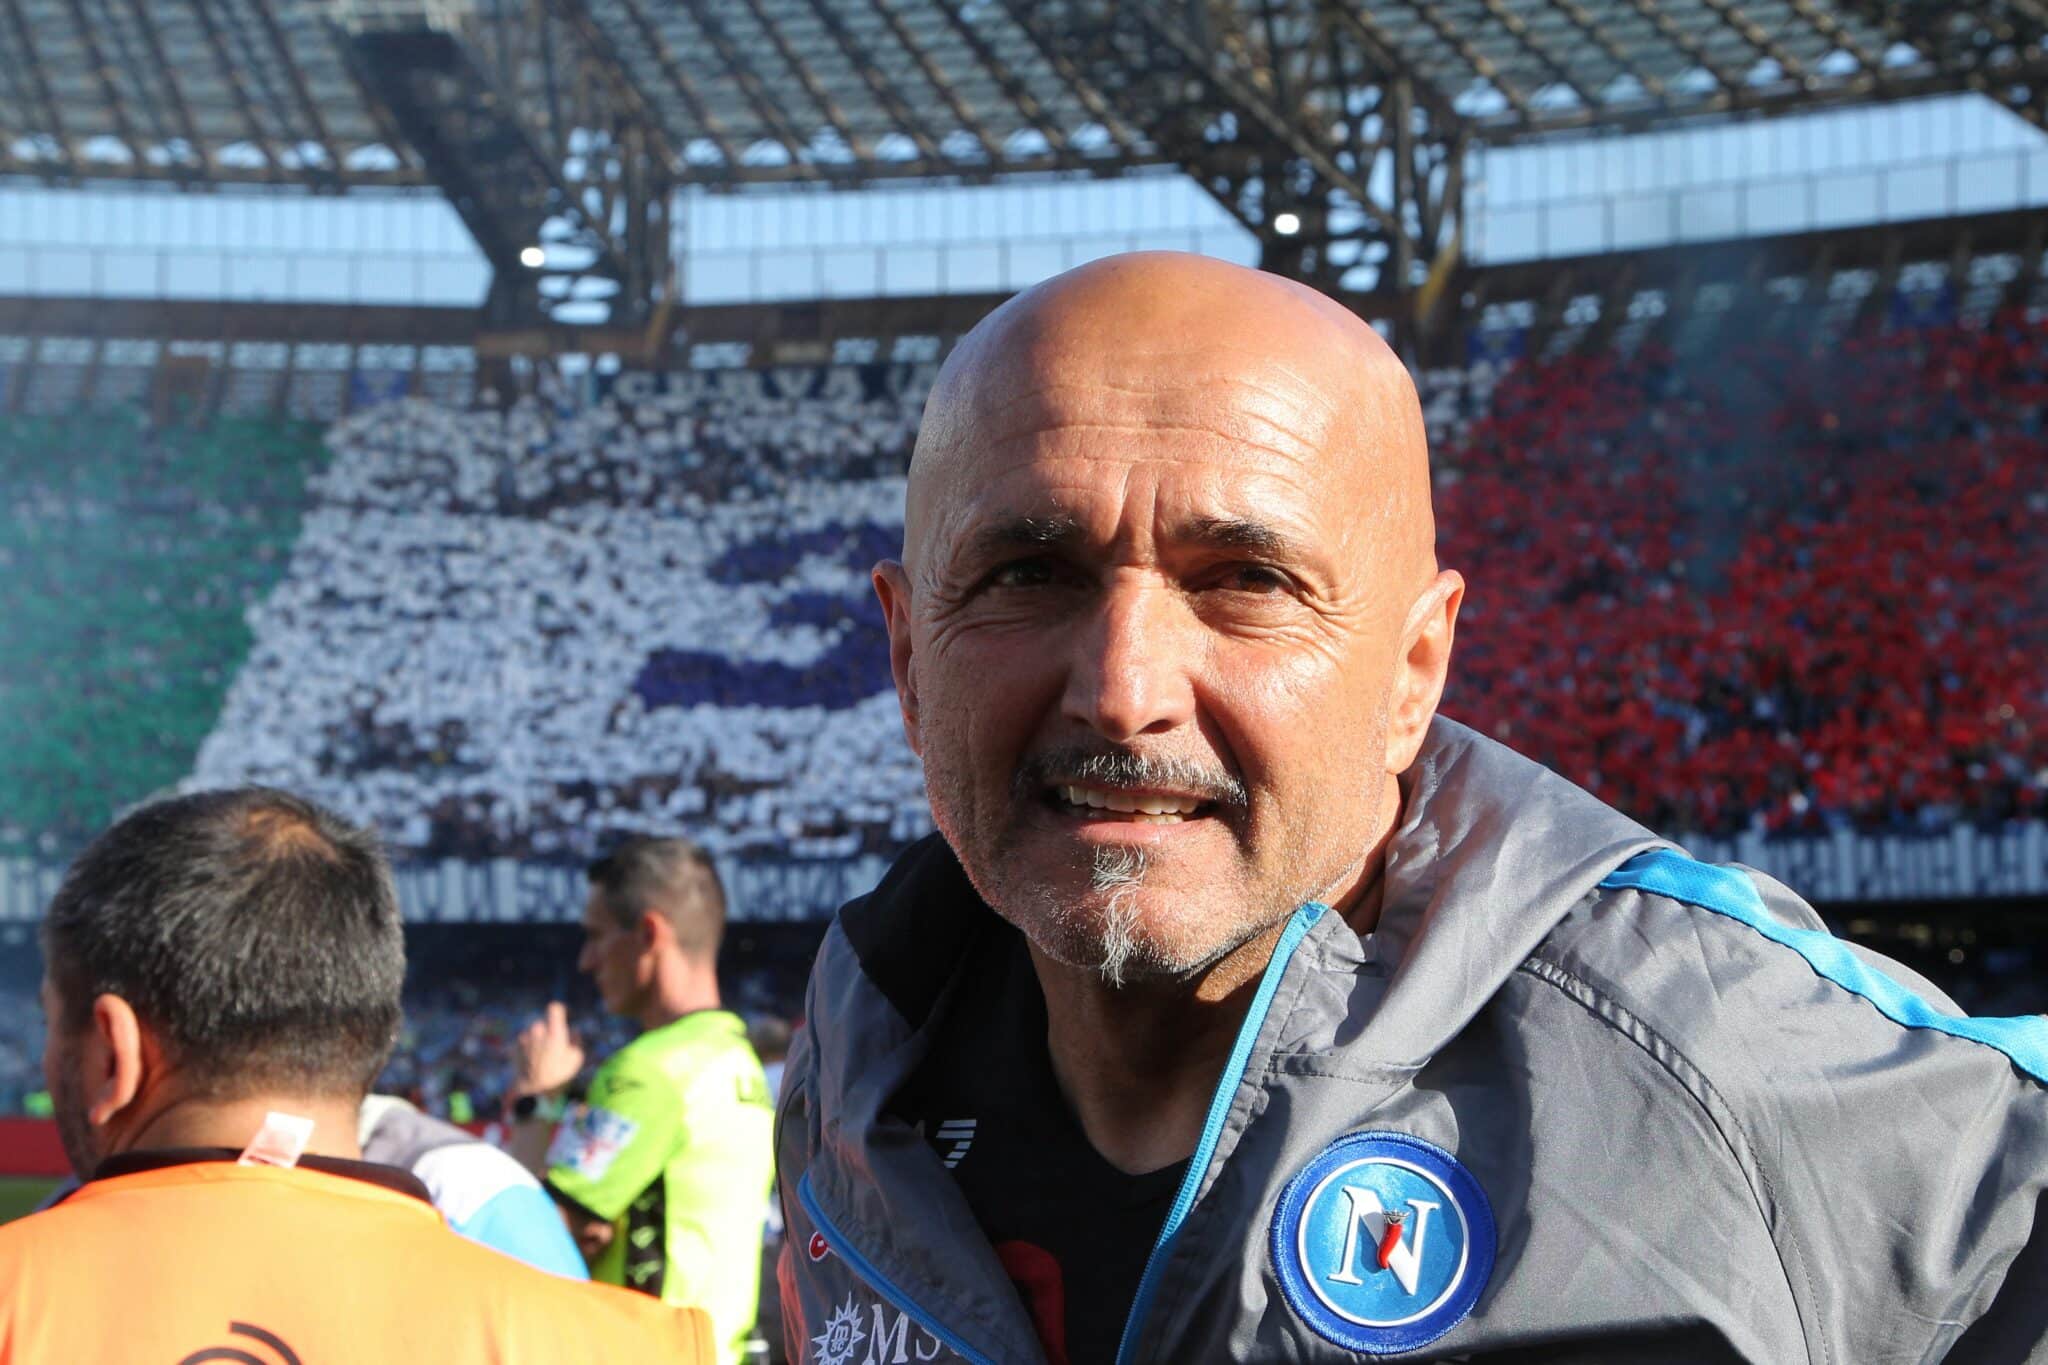 Italy coach Luciano Spalletti has revealed that his decision to leave Napoli wasn’t born out of thin air after winning the title but had been coming.